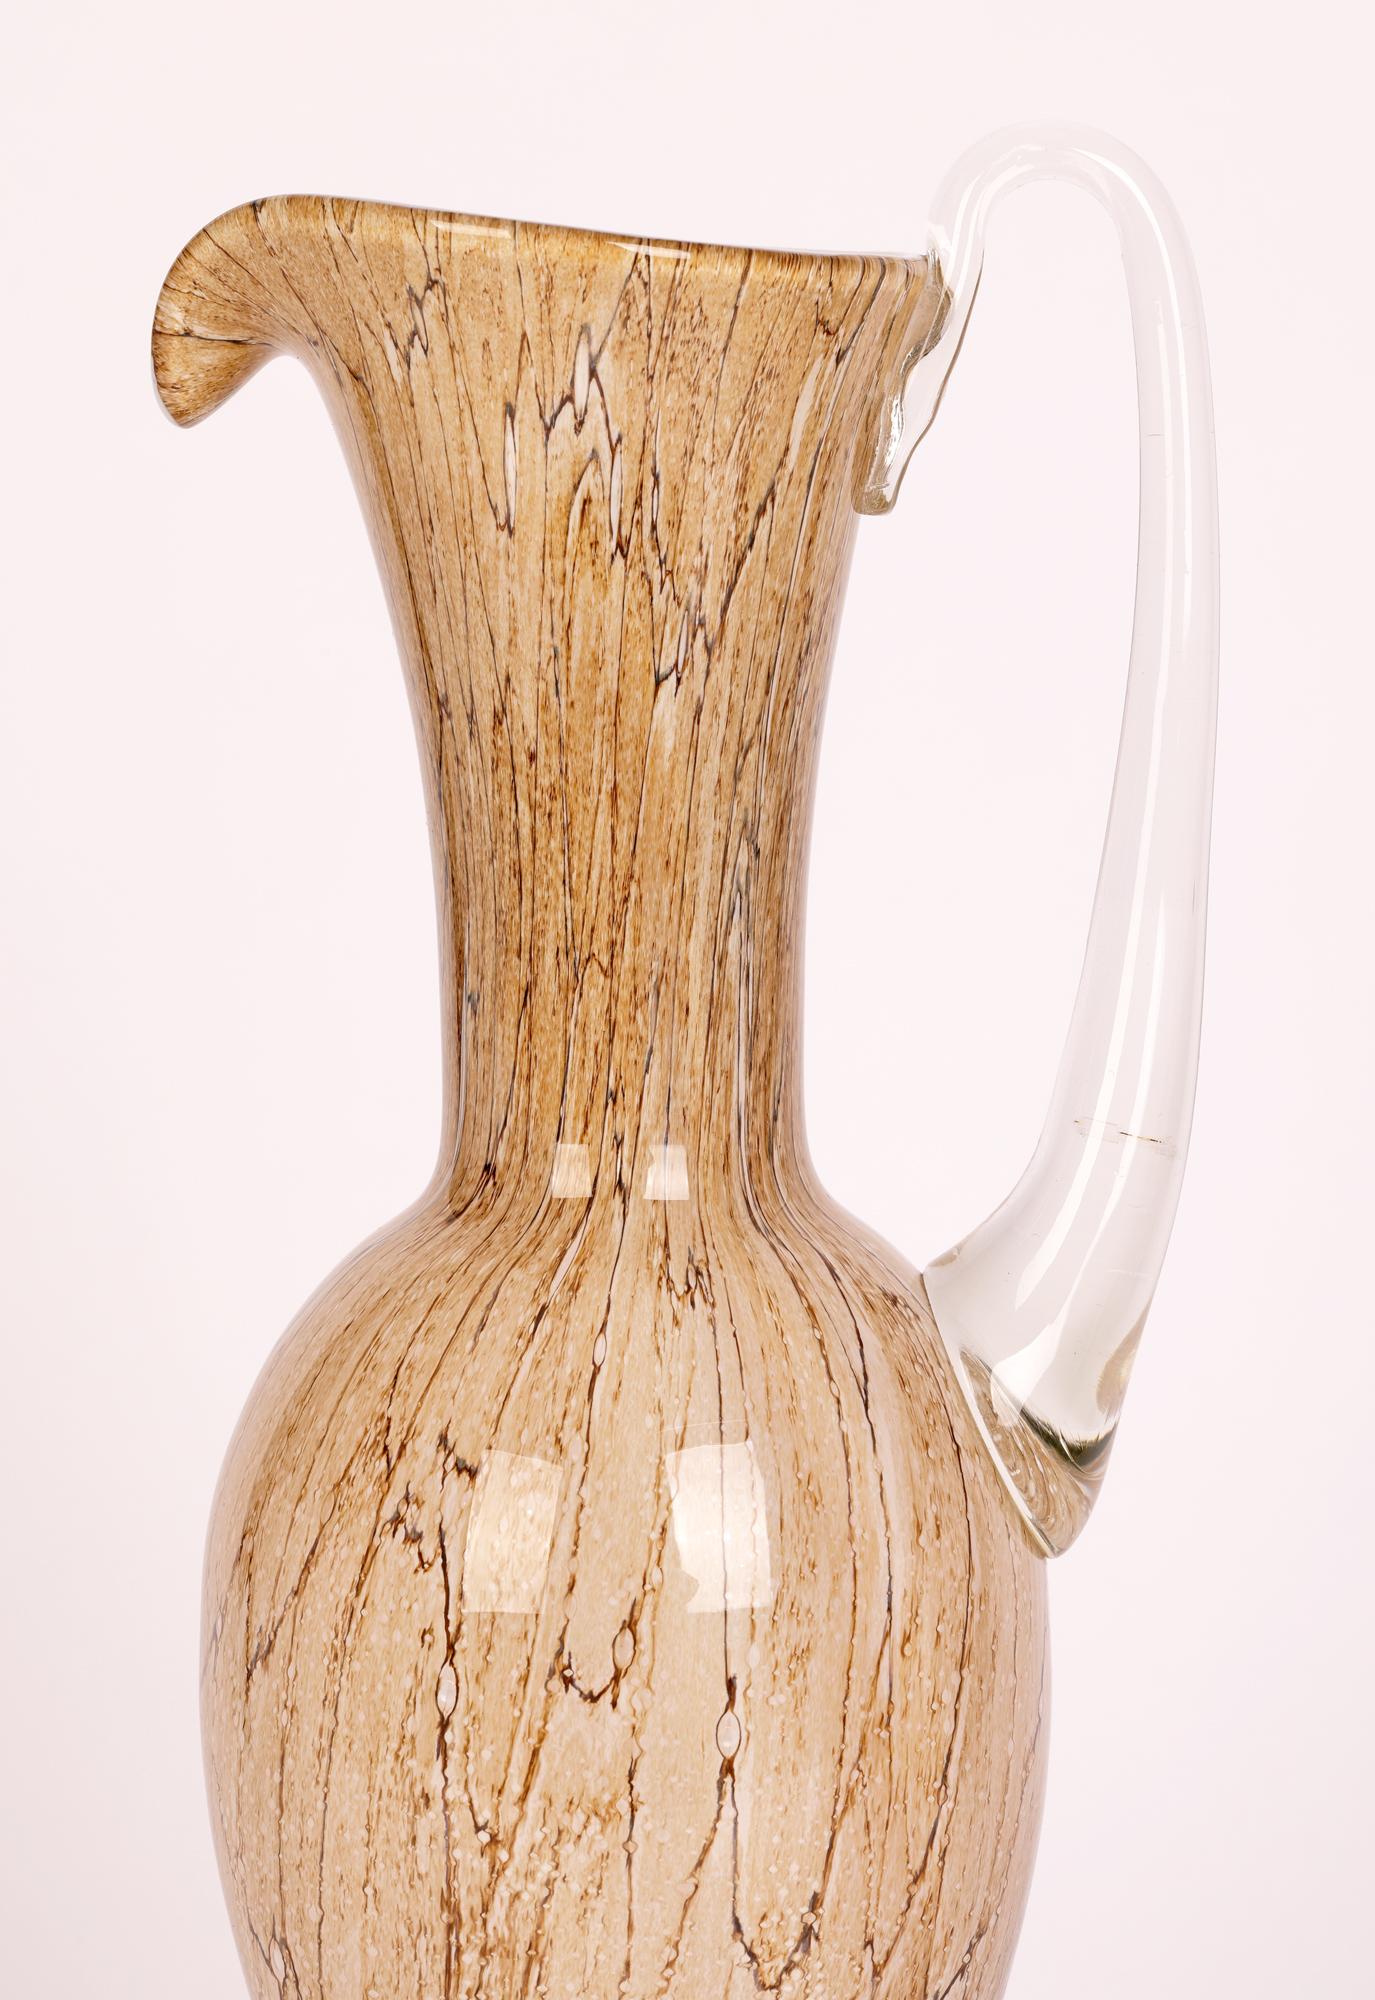 A stunning tall and elegant hand-blown Polish art glass jug attributed to the Jozefina Glass Makers, Krosno and dating from around 1980.

The Josefina factory was founded in Krosno, Poland in 1980 by Jozef Jankowski, a renowned artist and glass